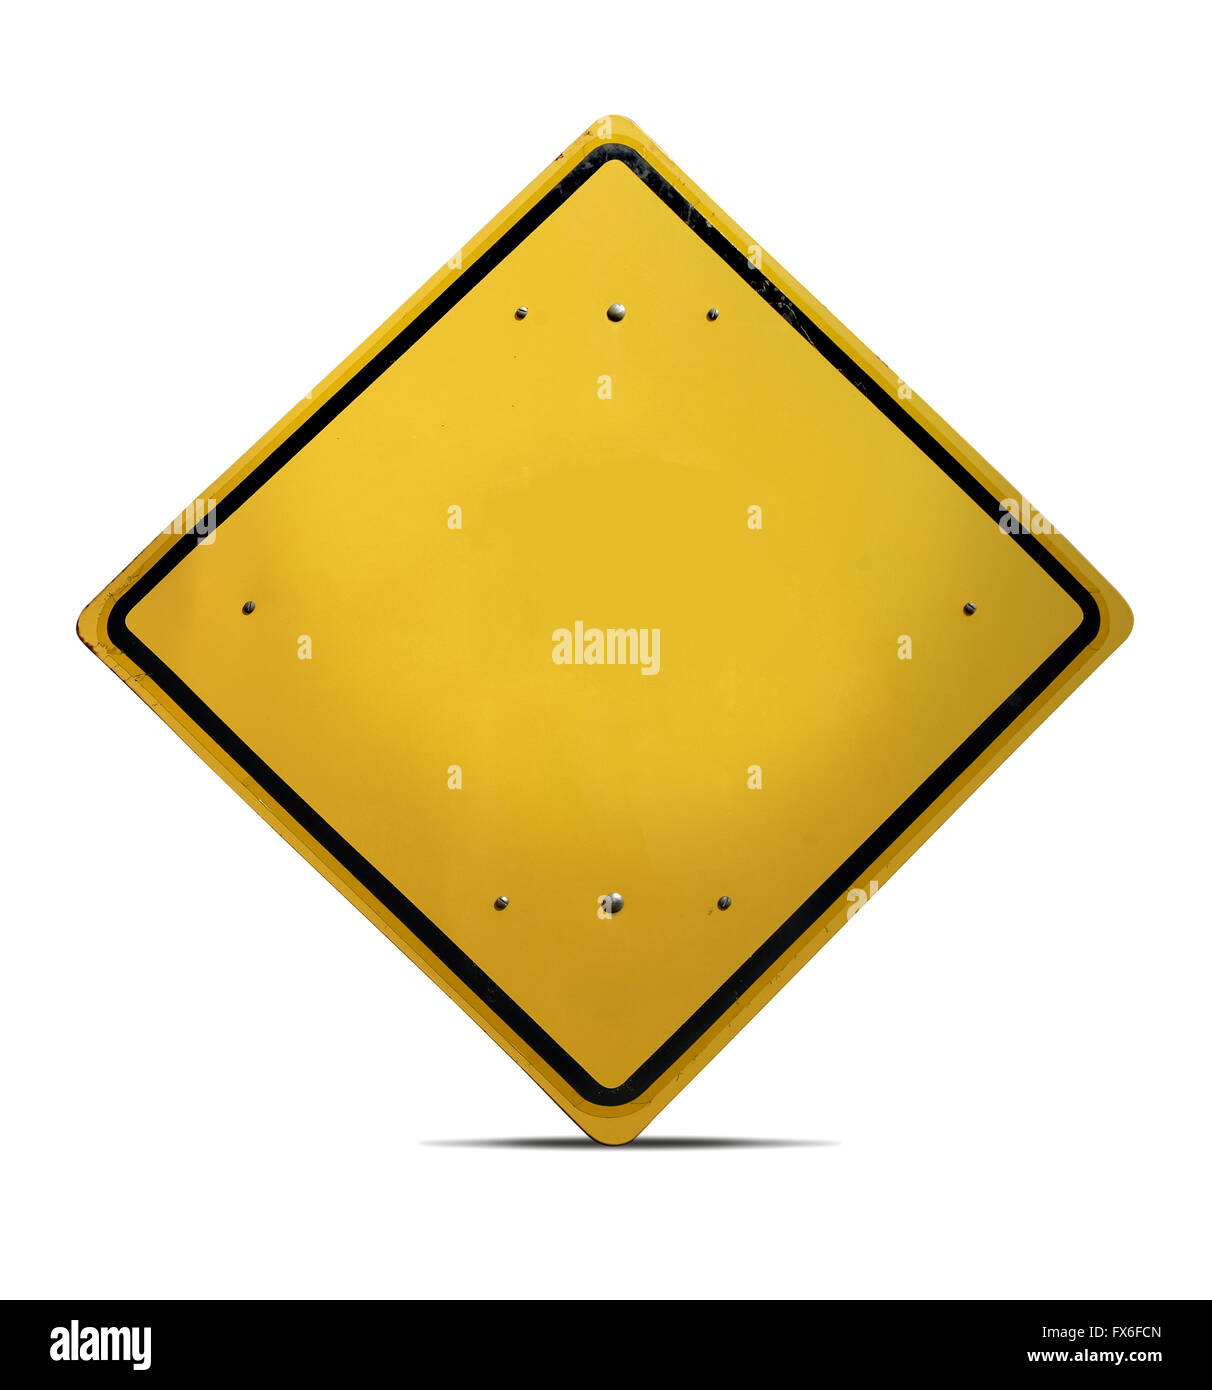 Empty road sign square template in yellow color with copy space, isolated white background. Stock Photo